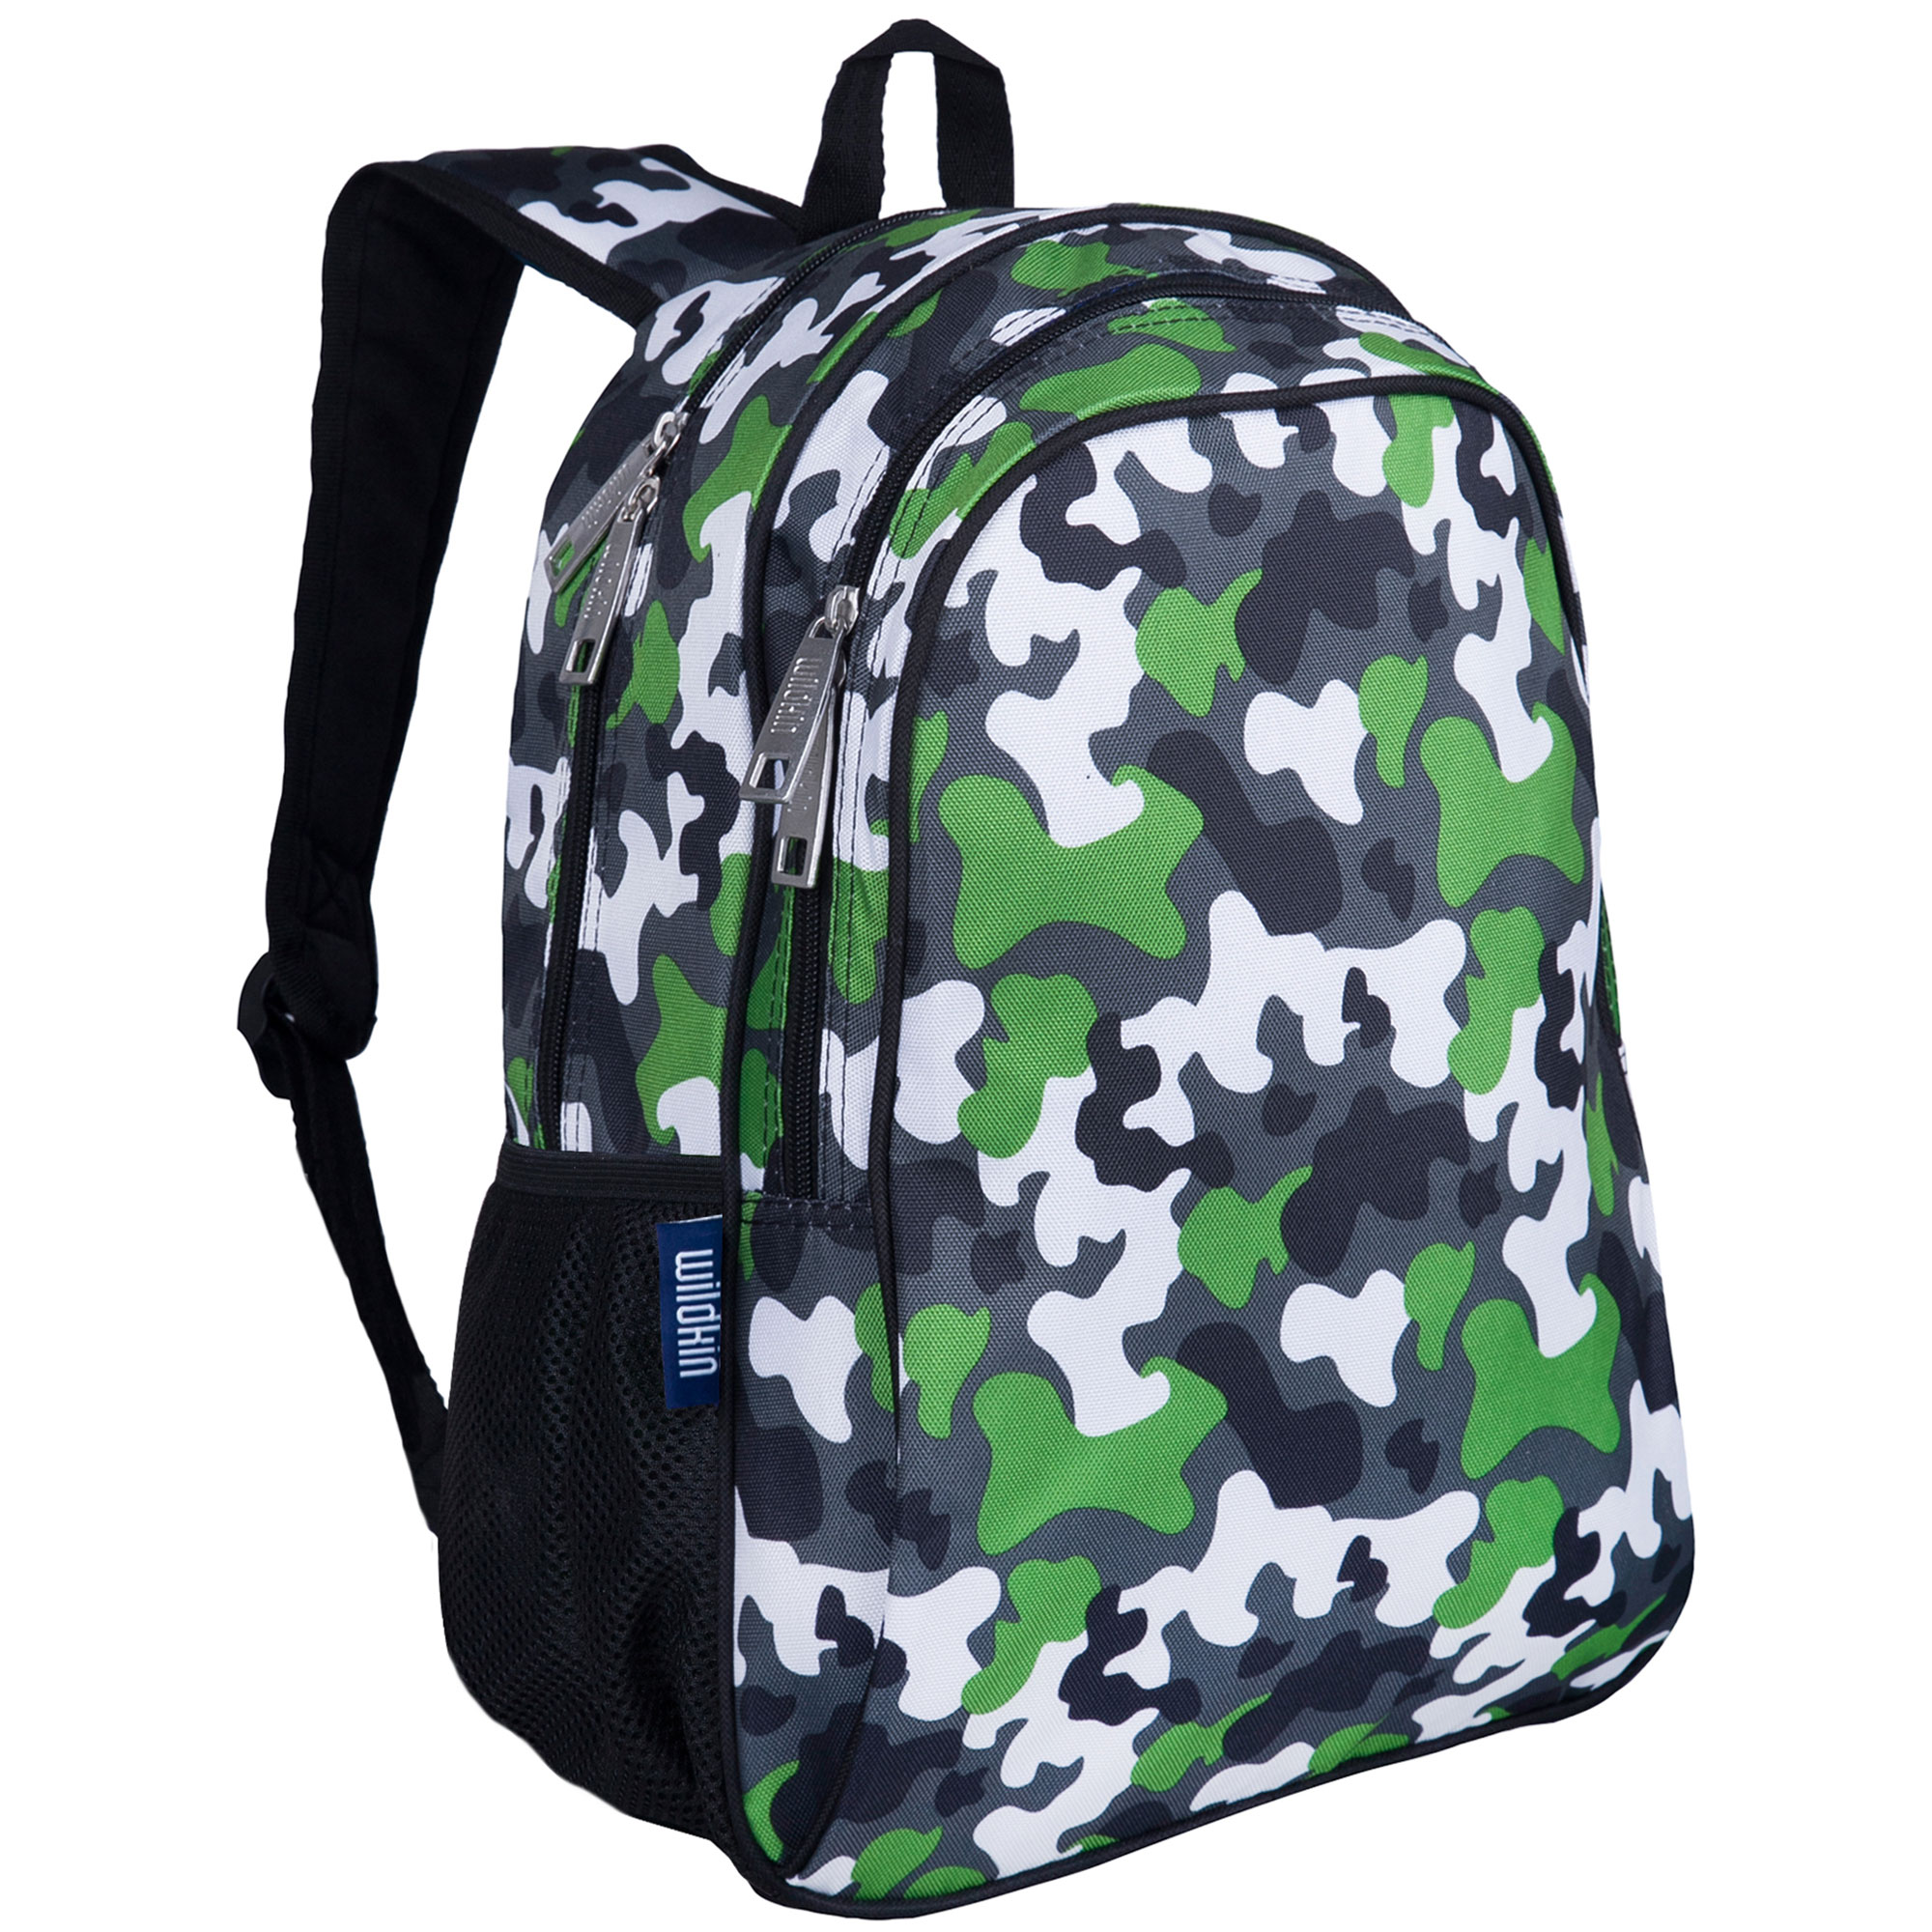 Wildkin Kids 15 Inch School and Travel Backpack for Boys and Girls (Green Camo) - image 1 of 7